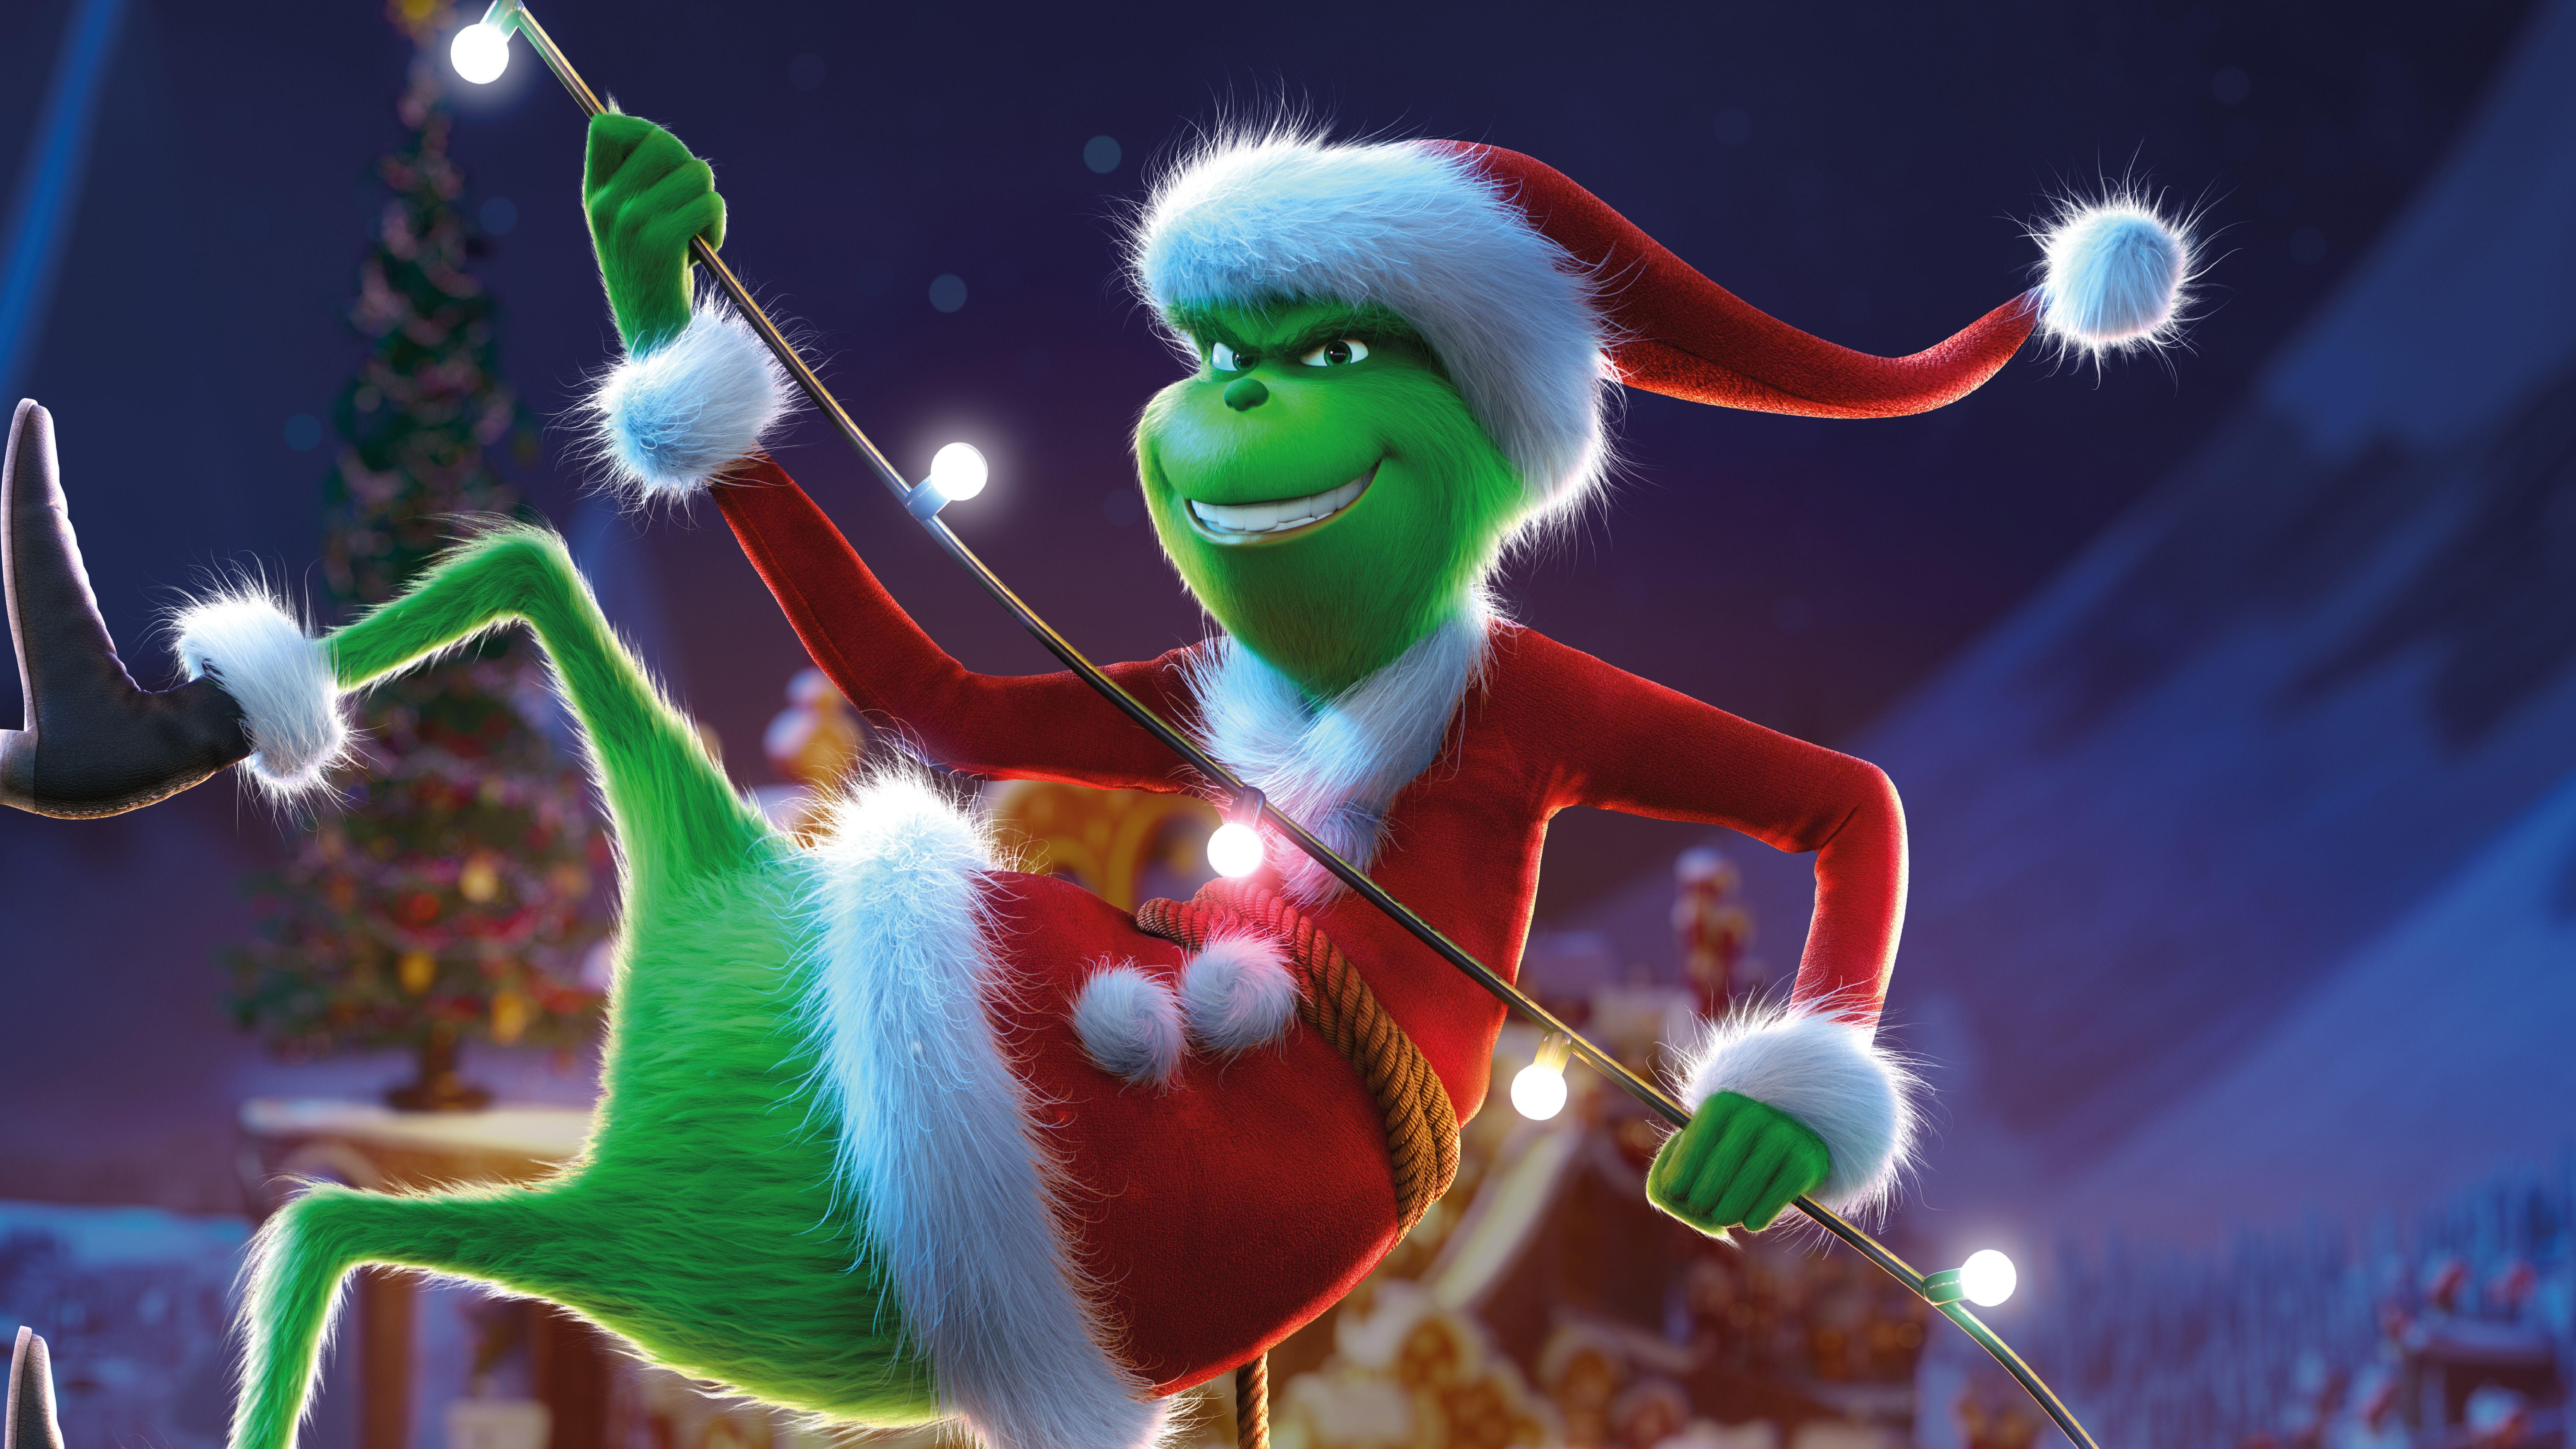 The Grinch  How The Grinch Stole Christmas Photo 40394113  Fanpop